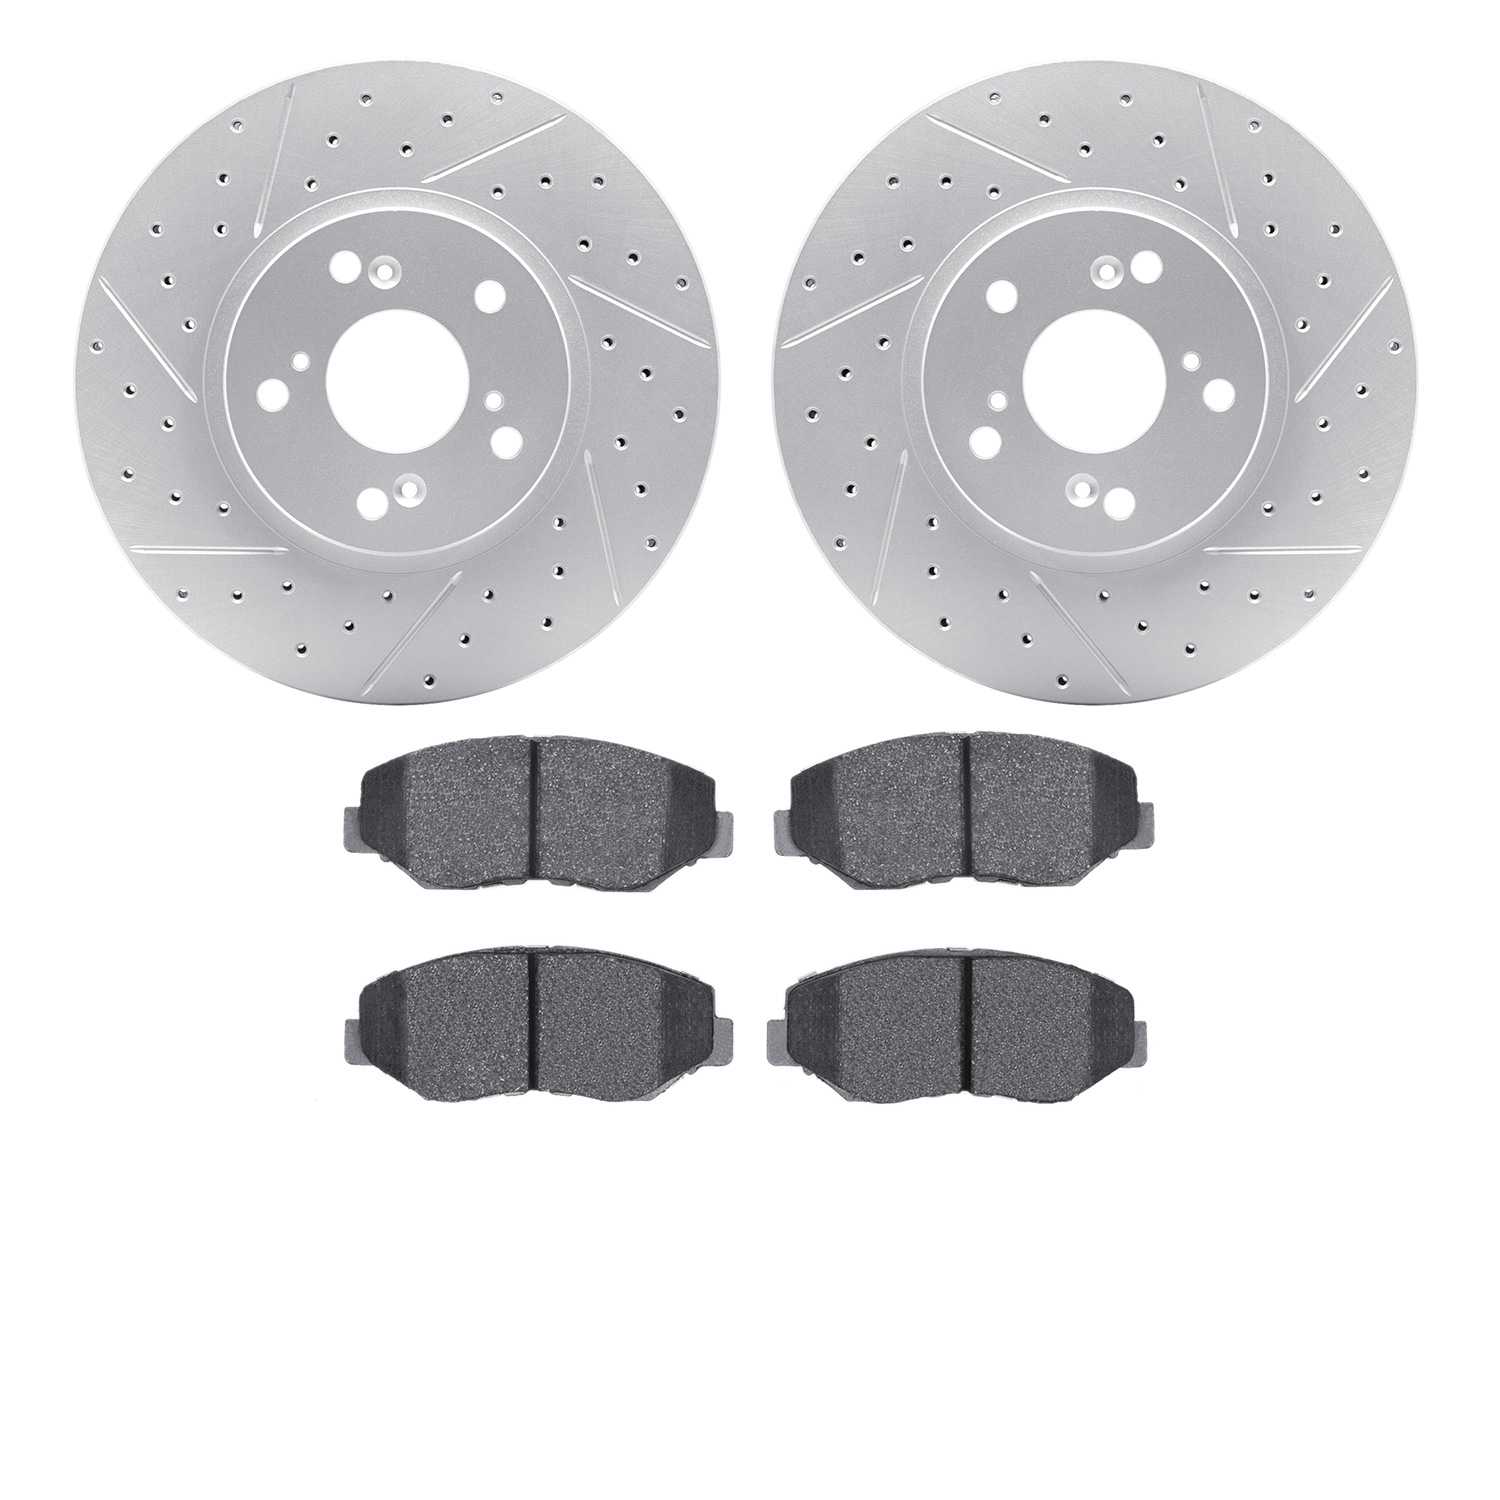 2502-59052 Geoperformance Drilled/Slotted Rotors w/5000 Advanced Brake Pads Kit, 2003-2008 Acura/Honda, Position: Front